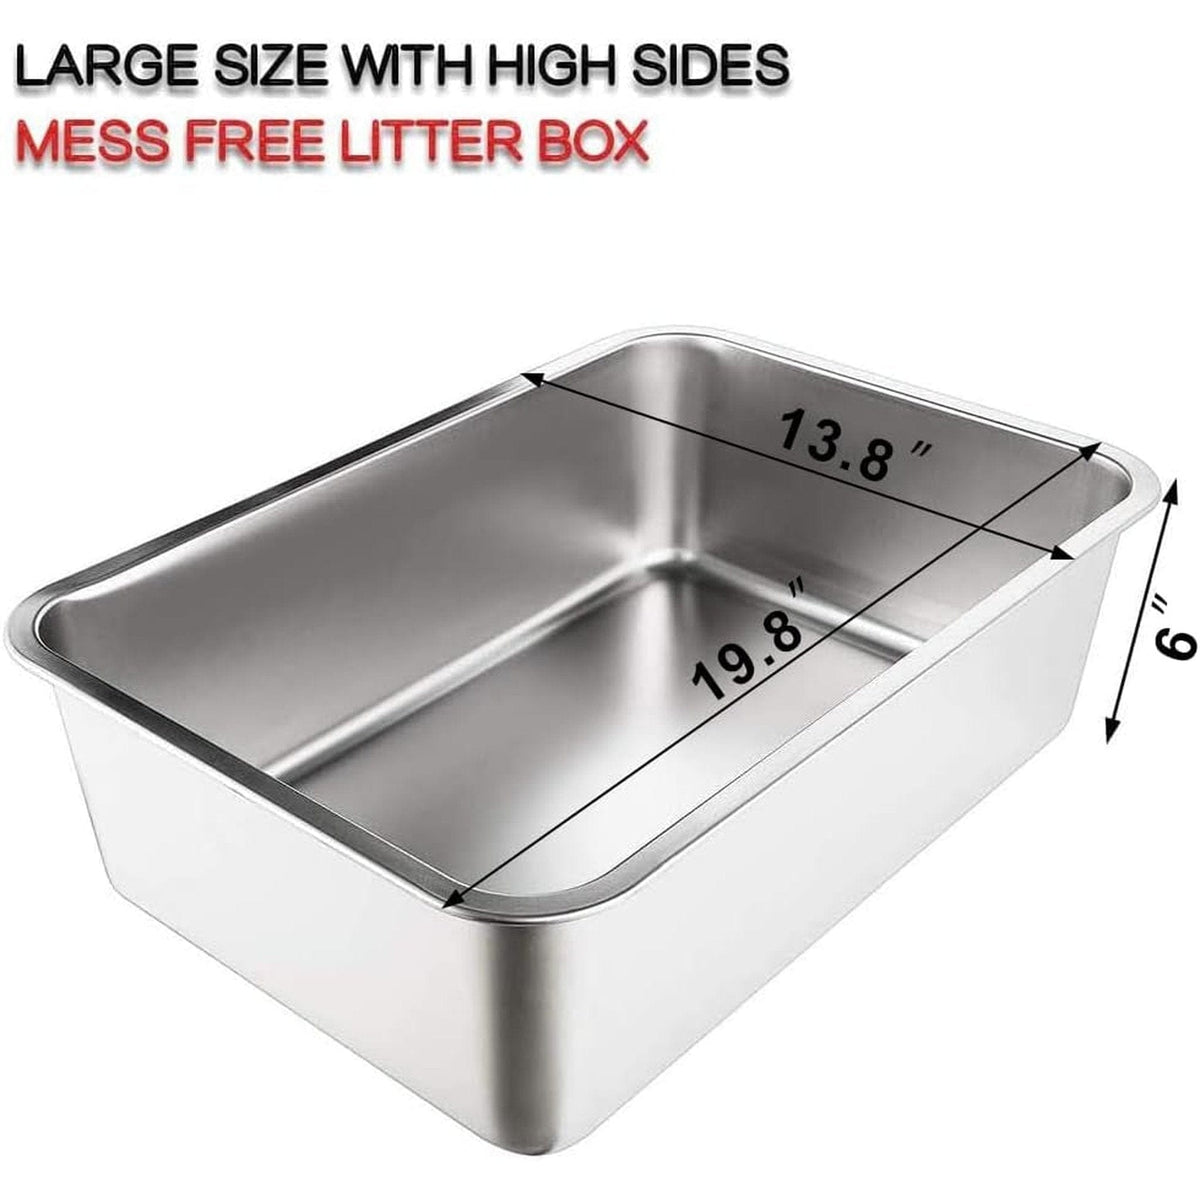 🐱 Durable Stainless Steel Cat Litter Box 📦 Medium:19.8*13.8in Pets Paradise Pet Supplies